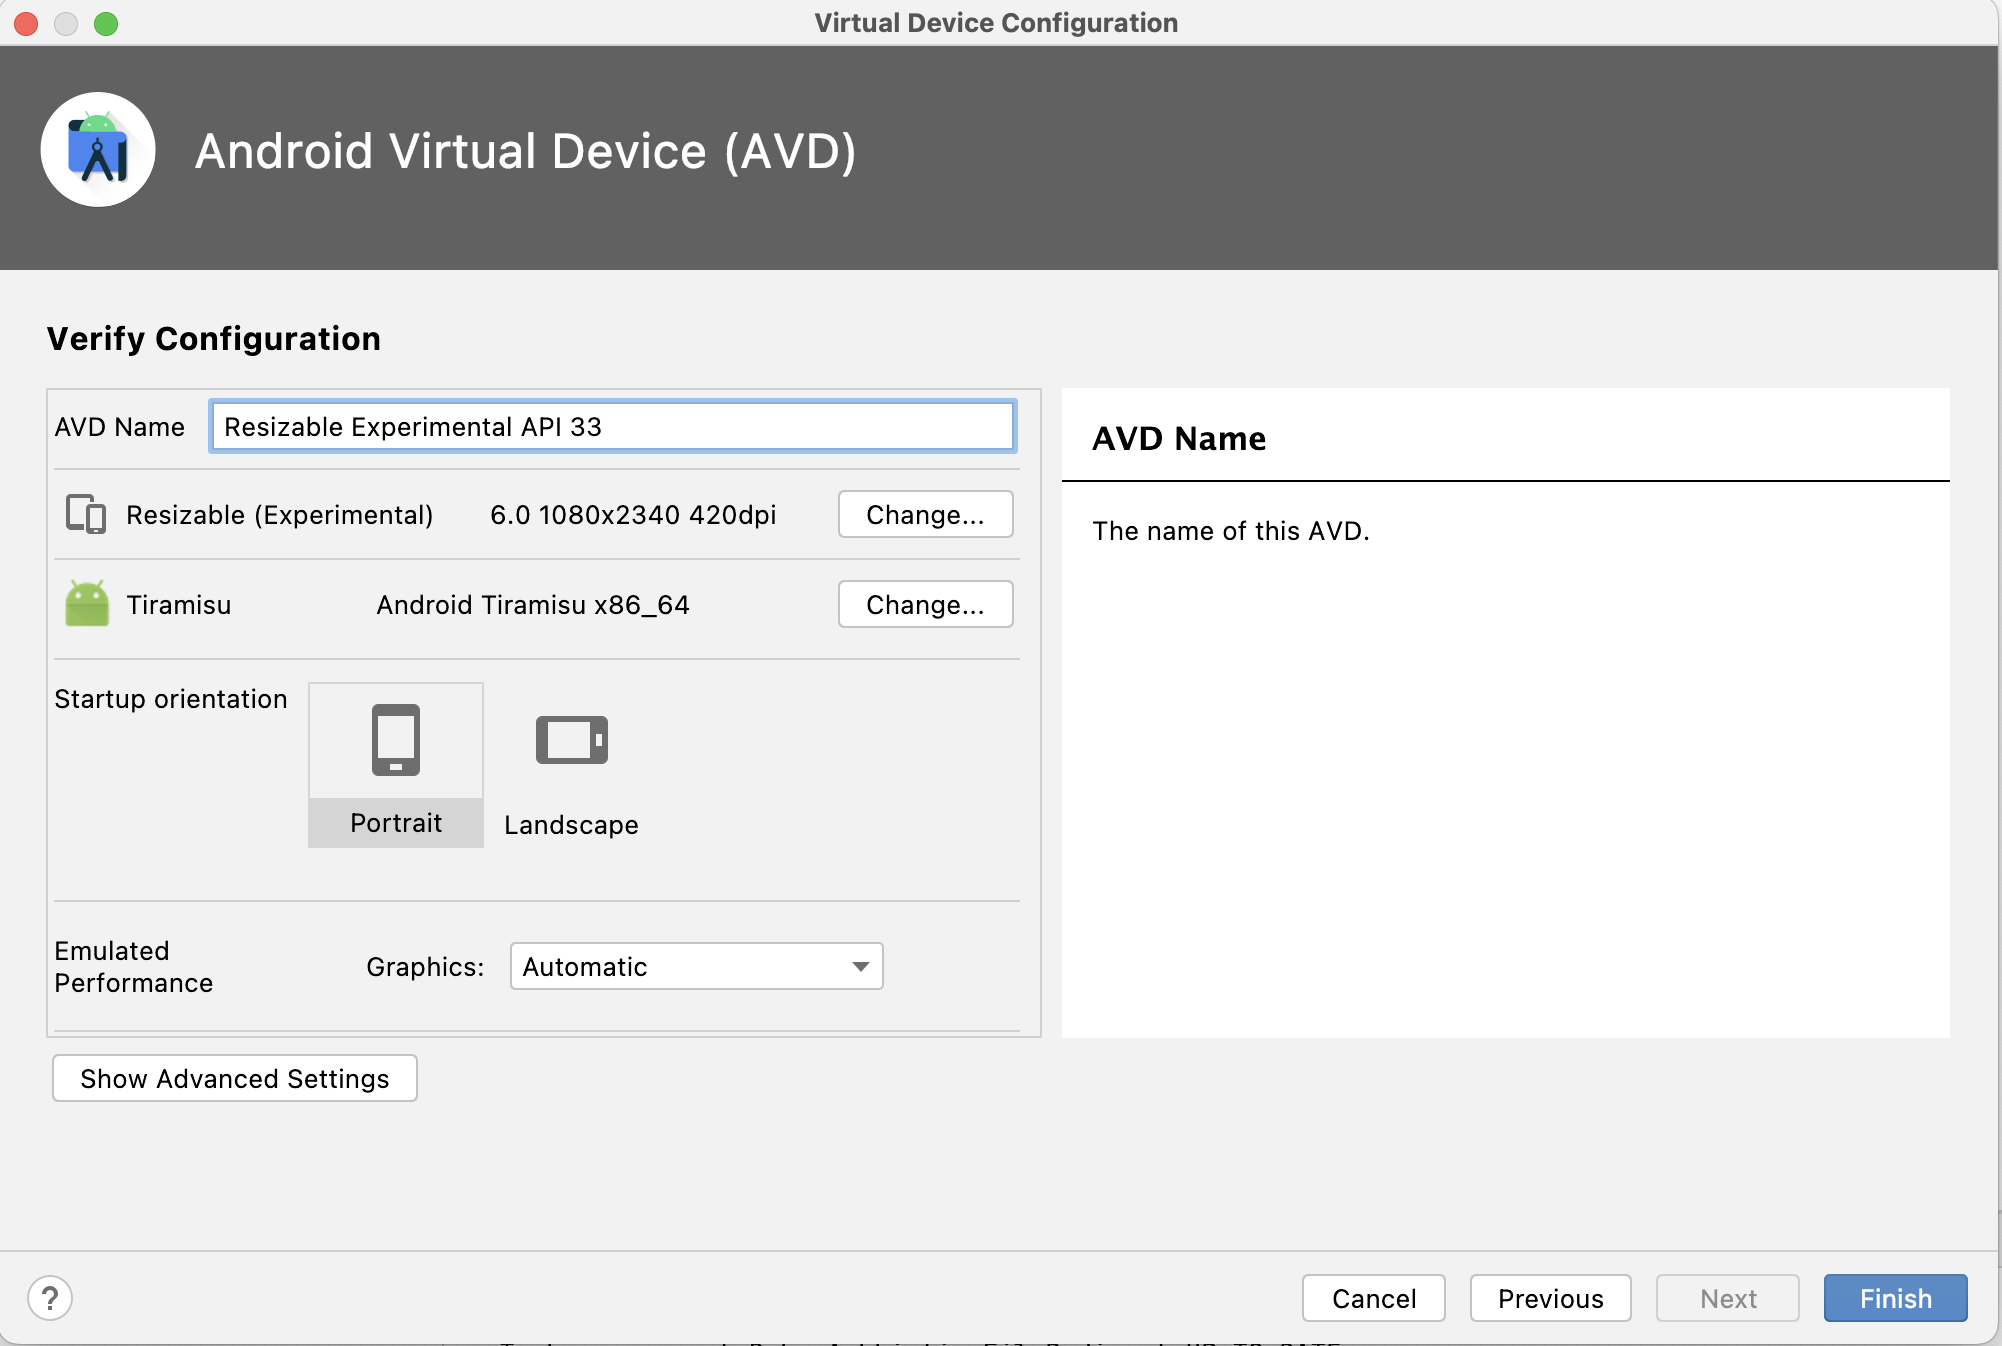 The Virtual Configration screen in Android Virtural Device (AVD) displays. The configuration screen includes a text field to enter the AVD name. Below the name field are a list of device options, including the device definition (Resizable Experimental), the system image (Tiramisu), and the orientation, with Portrait orientation selected by default. Buttons reading 